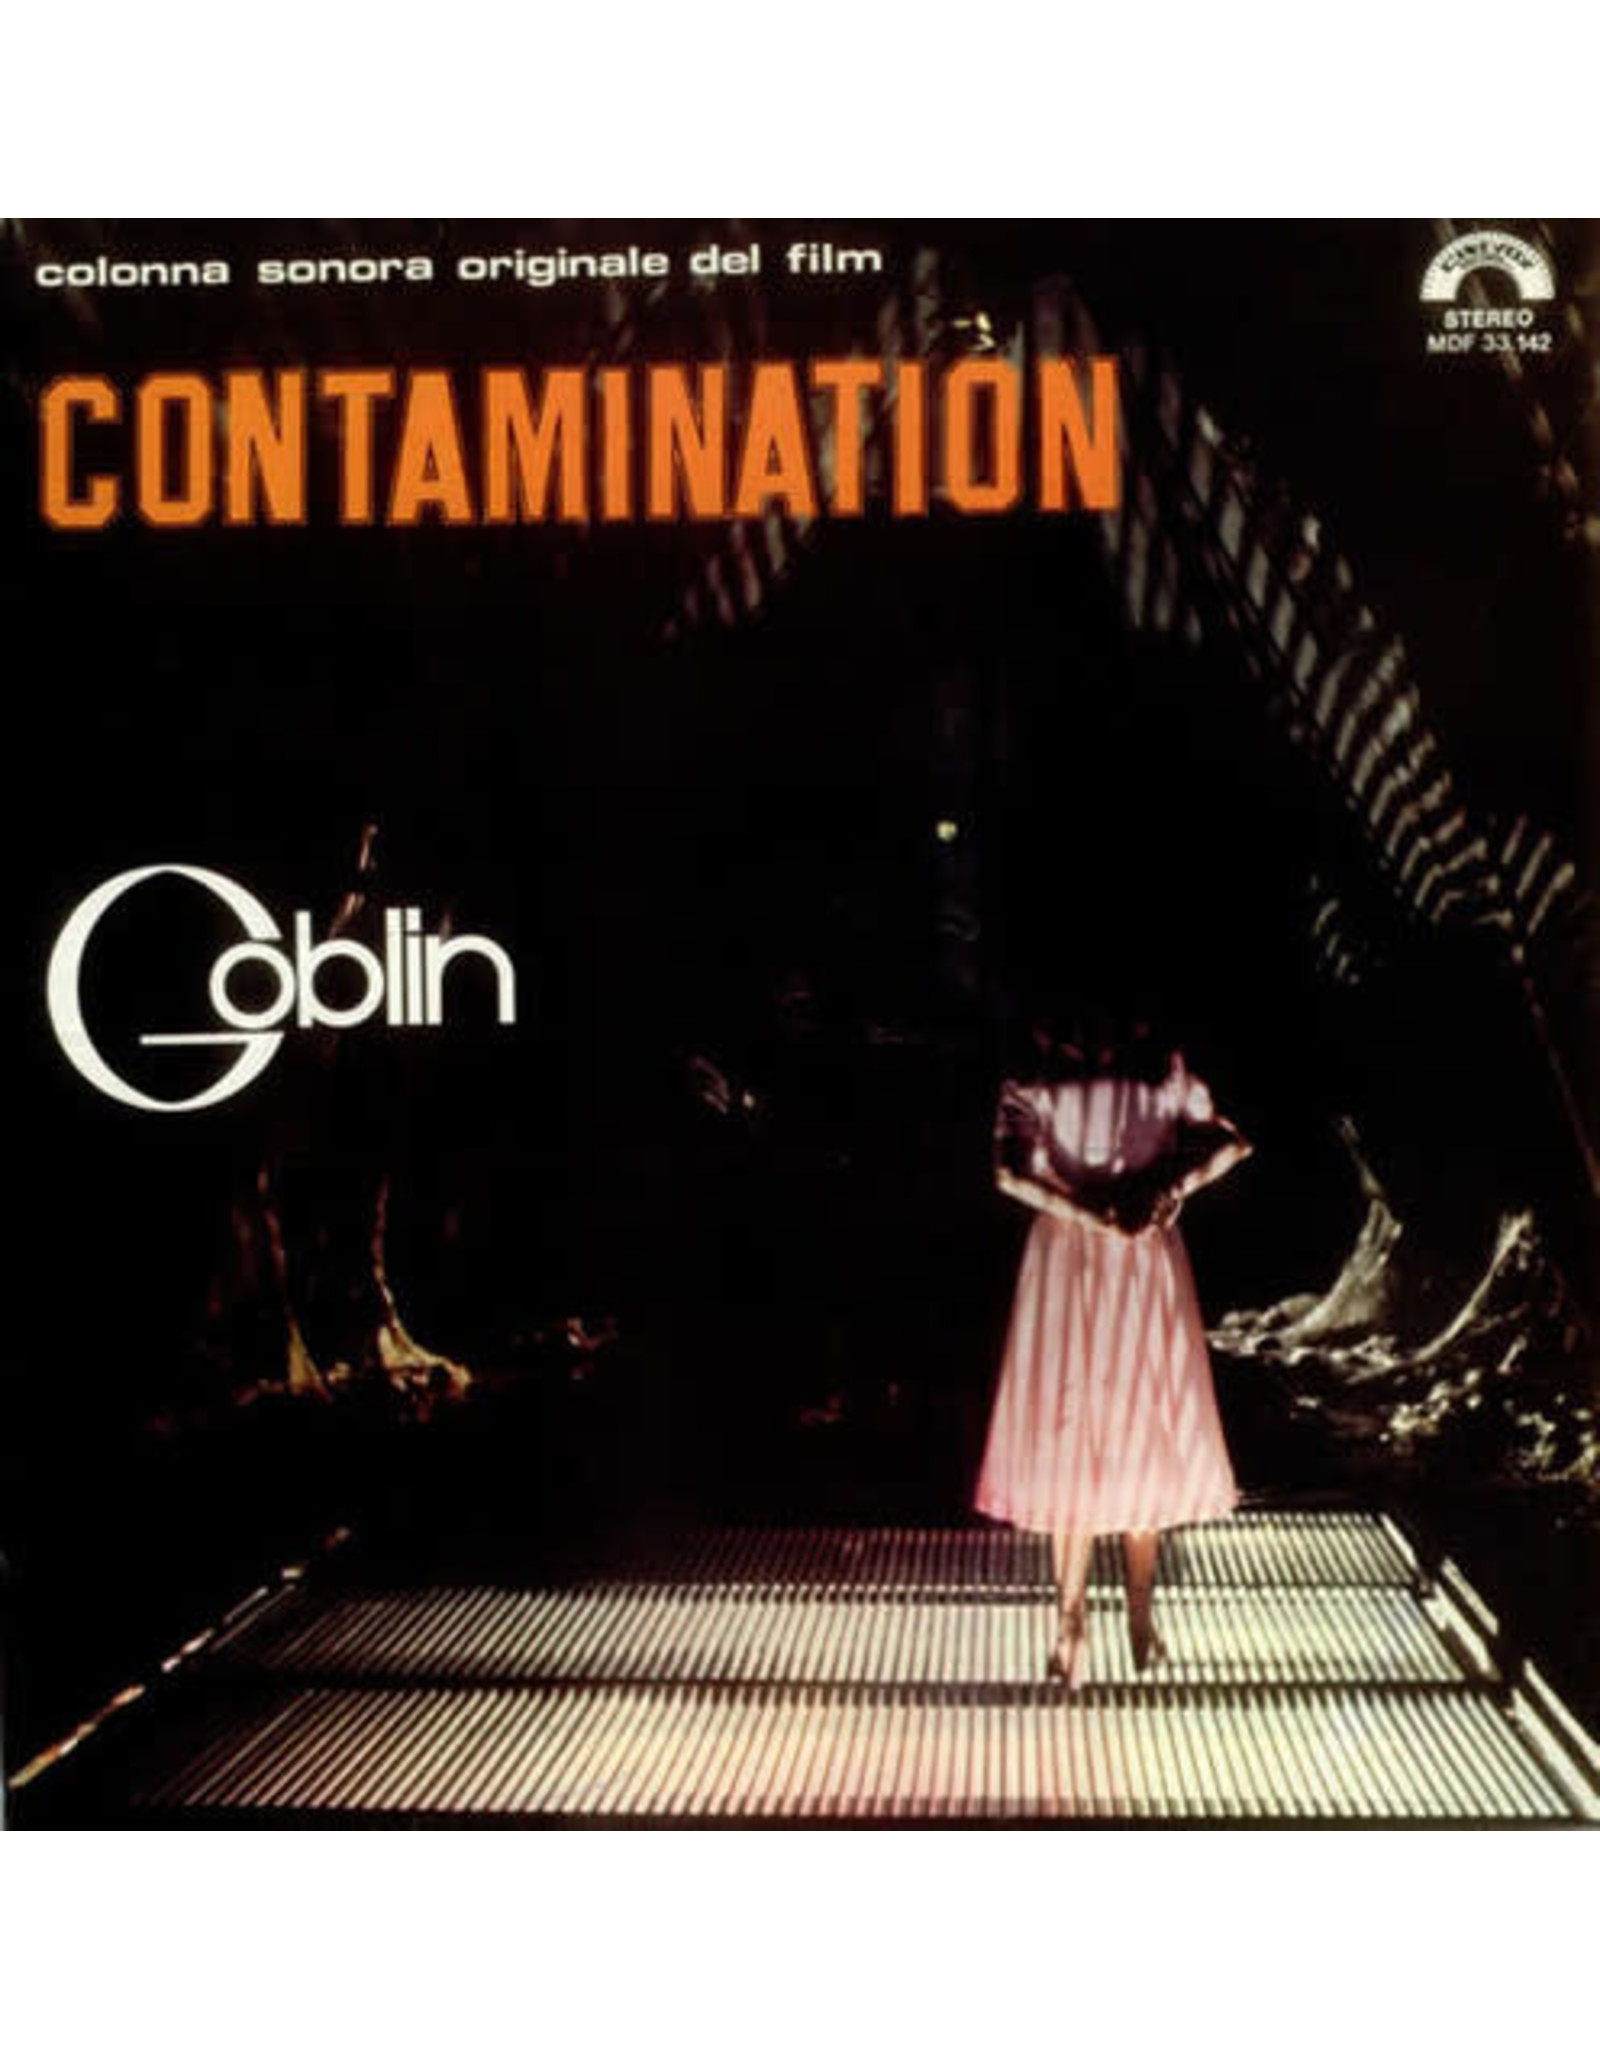 New Vinyl Goblin - Contamination (Limited Edition, 180g, Clear Purple) [Import] LP